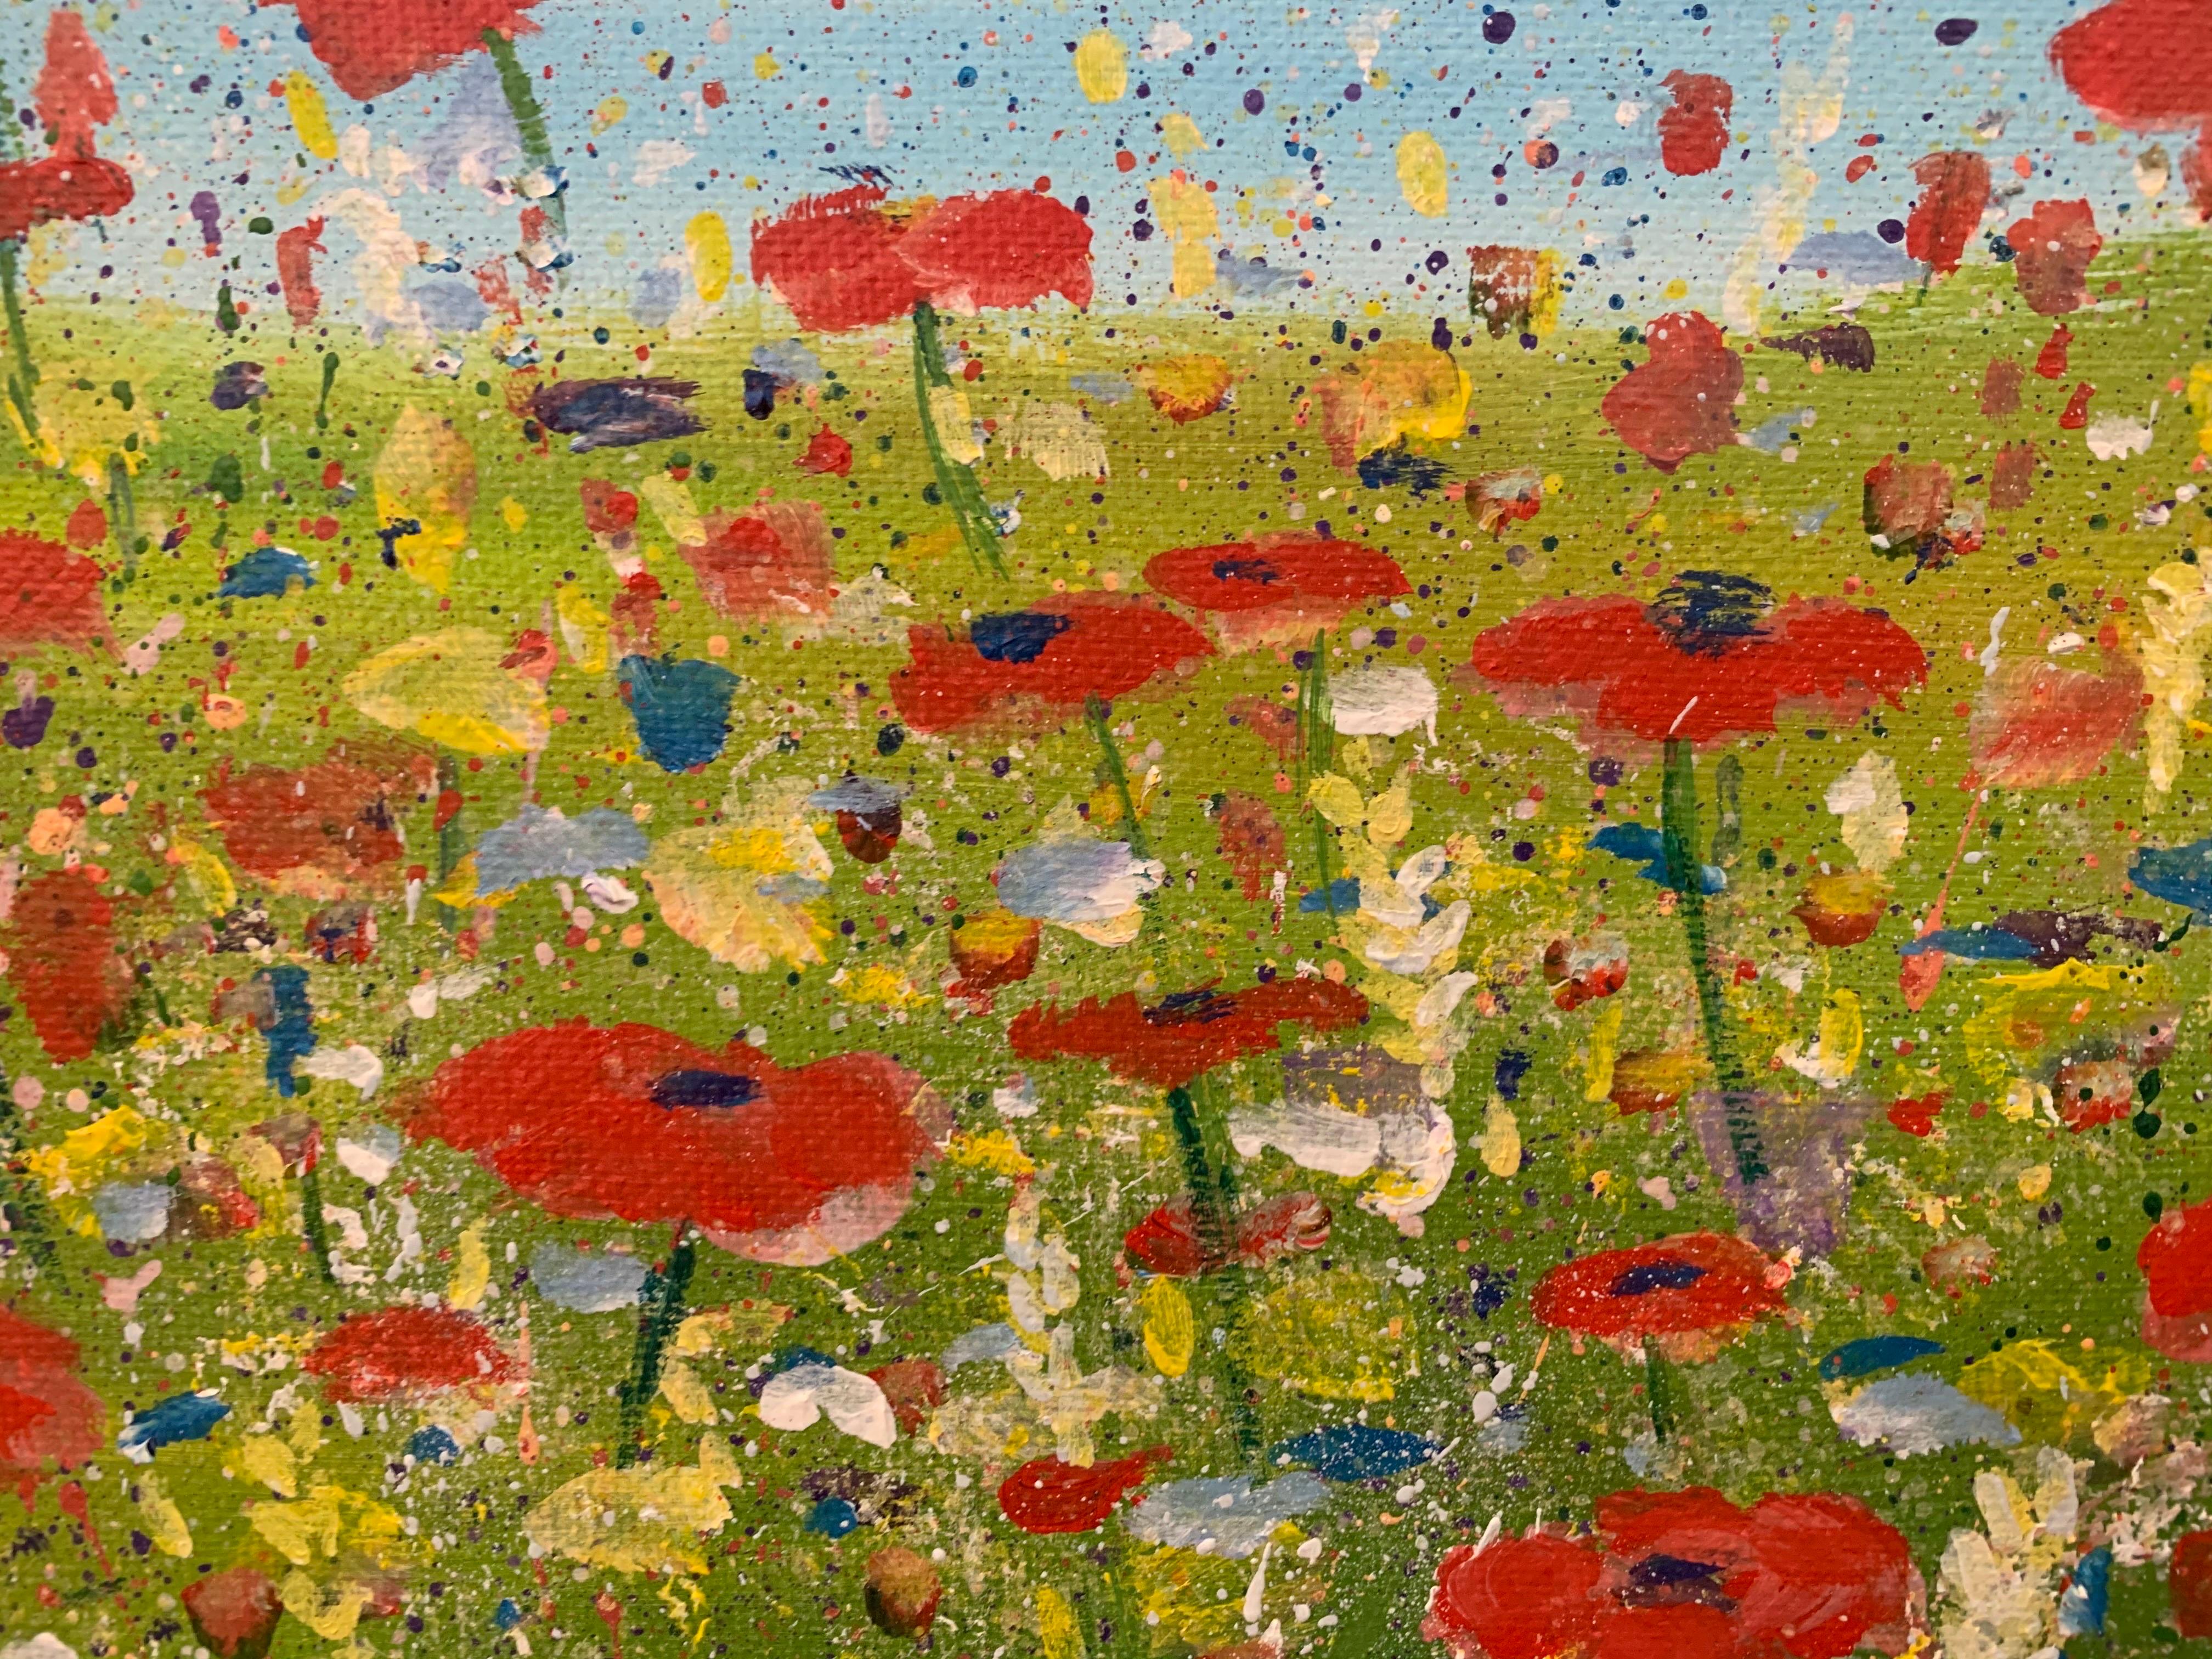 Impressionistic Wild Red Flowers in an English Meadow by Contemporary Artist For Sale 2